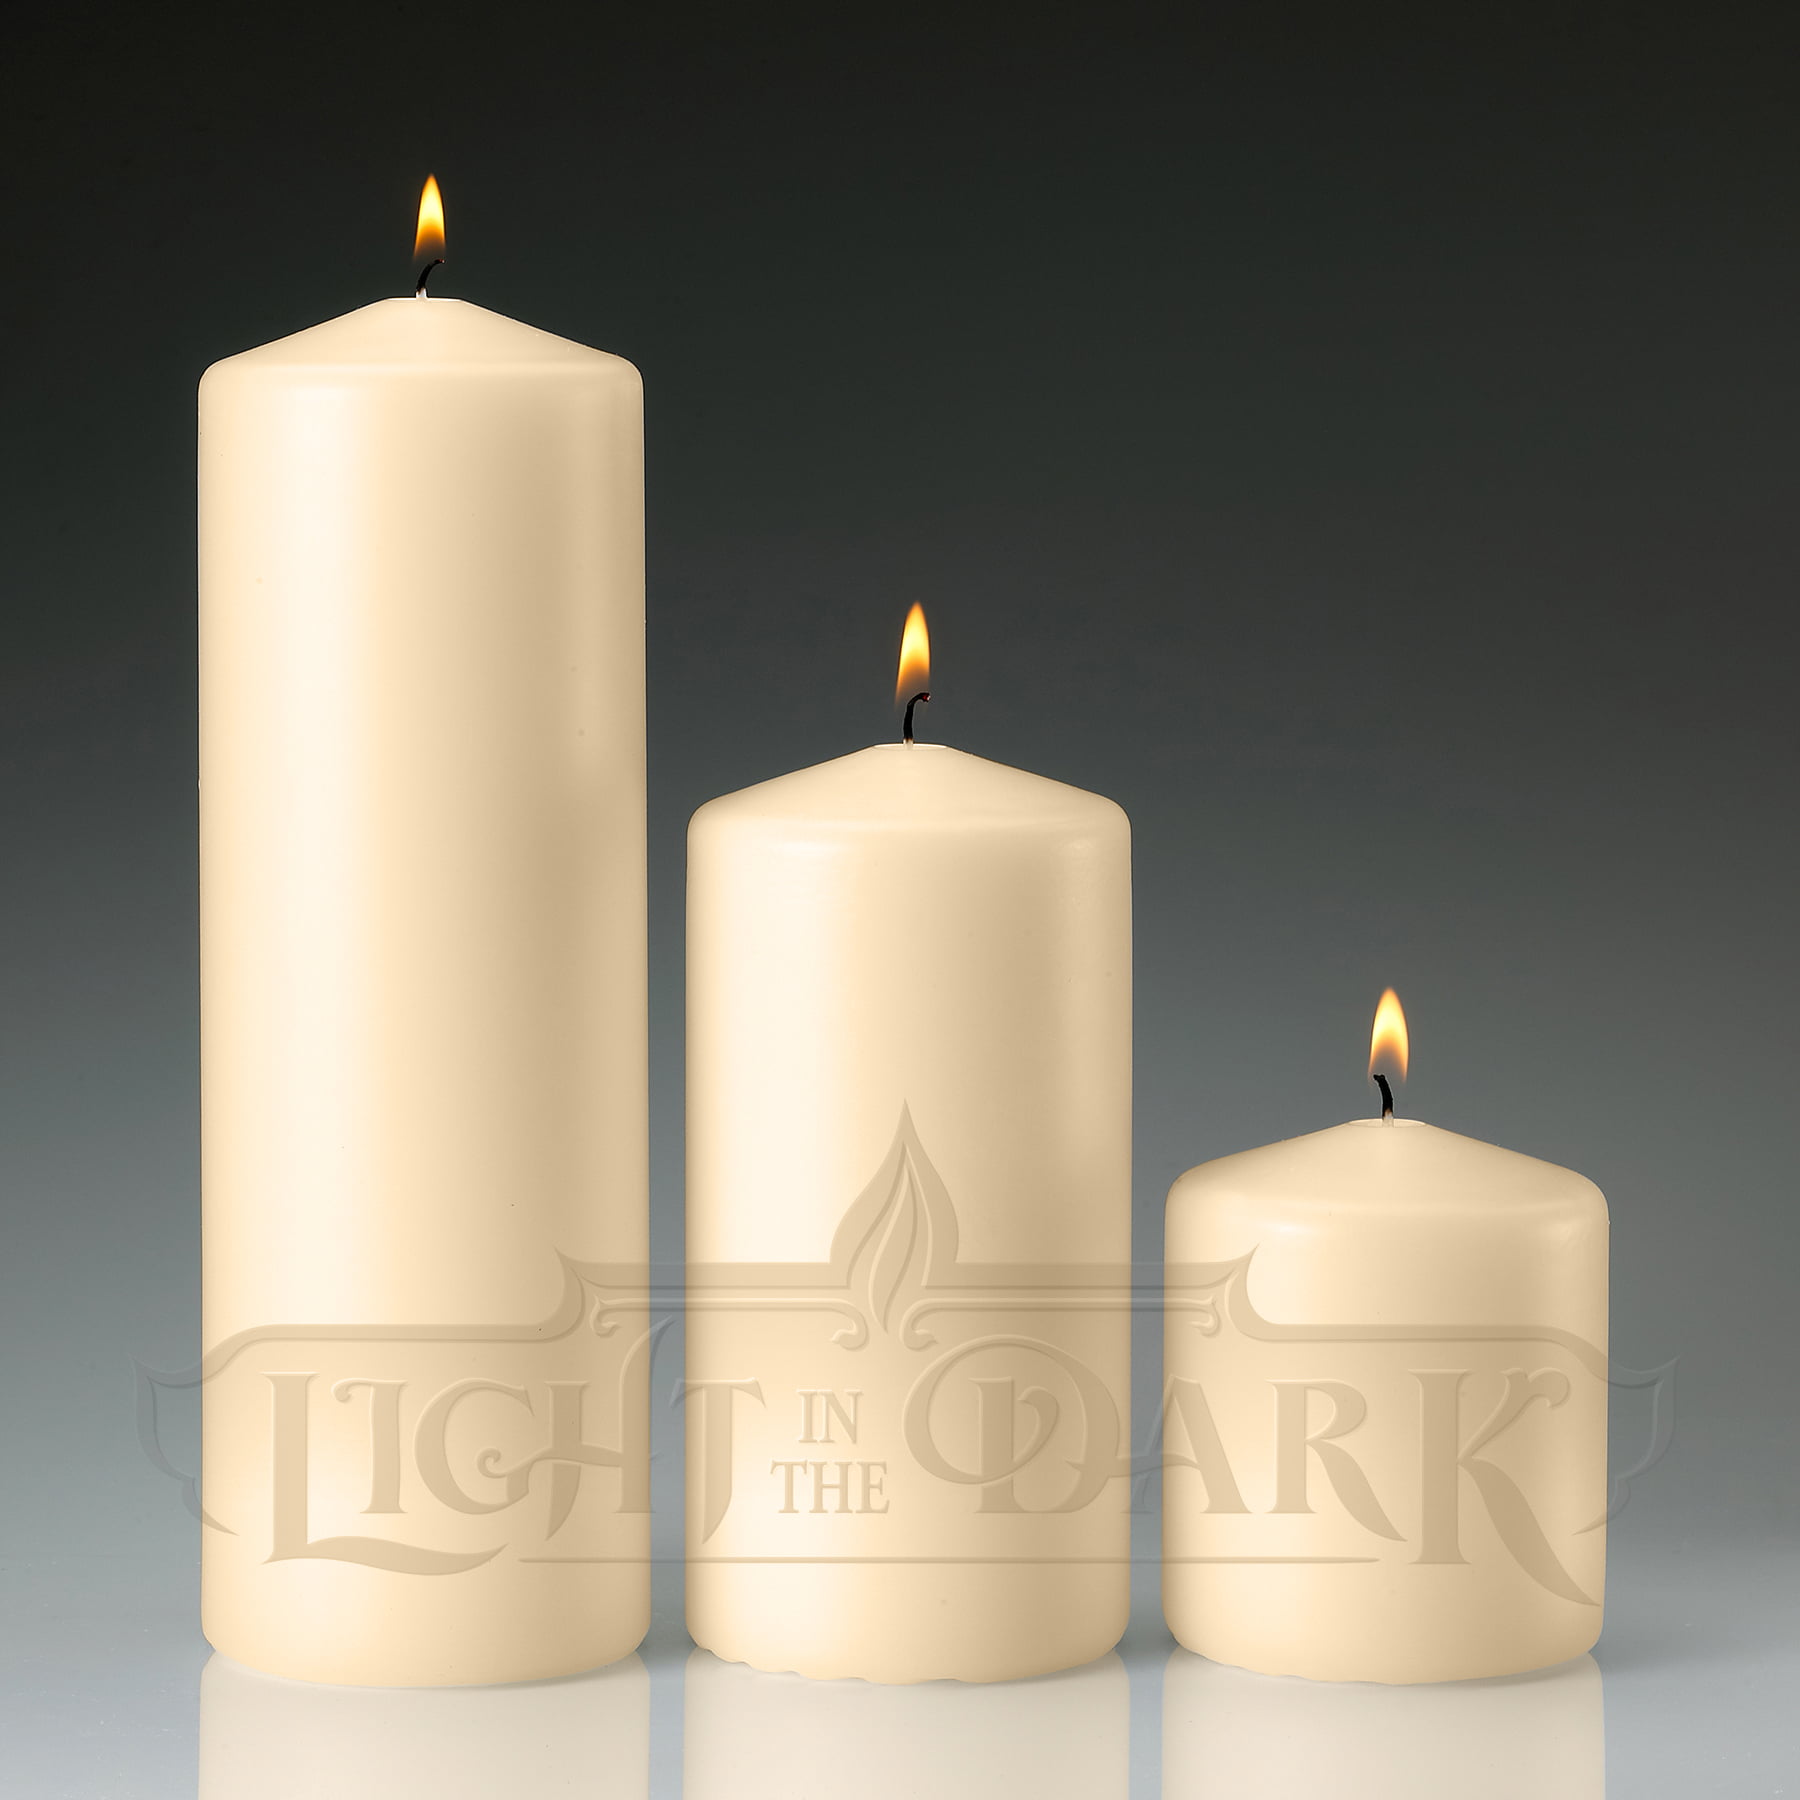 3x3" 3x6" 3x9" Yellow Citronella Scented Pillar Candles Set Of 3 